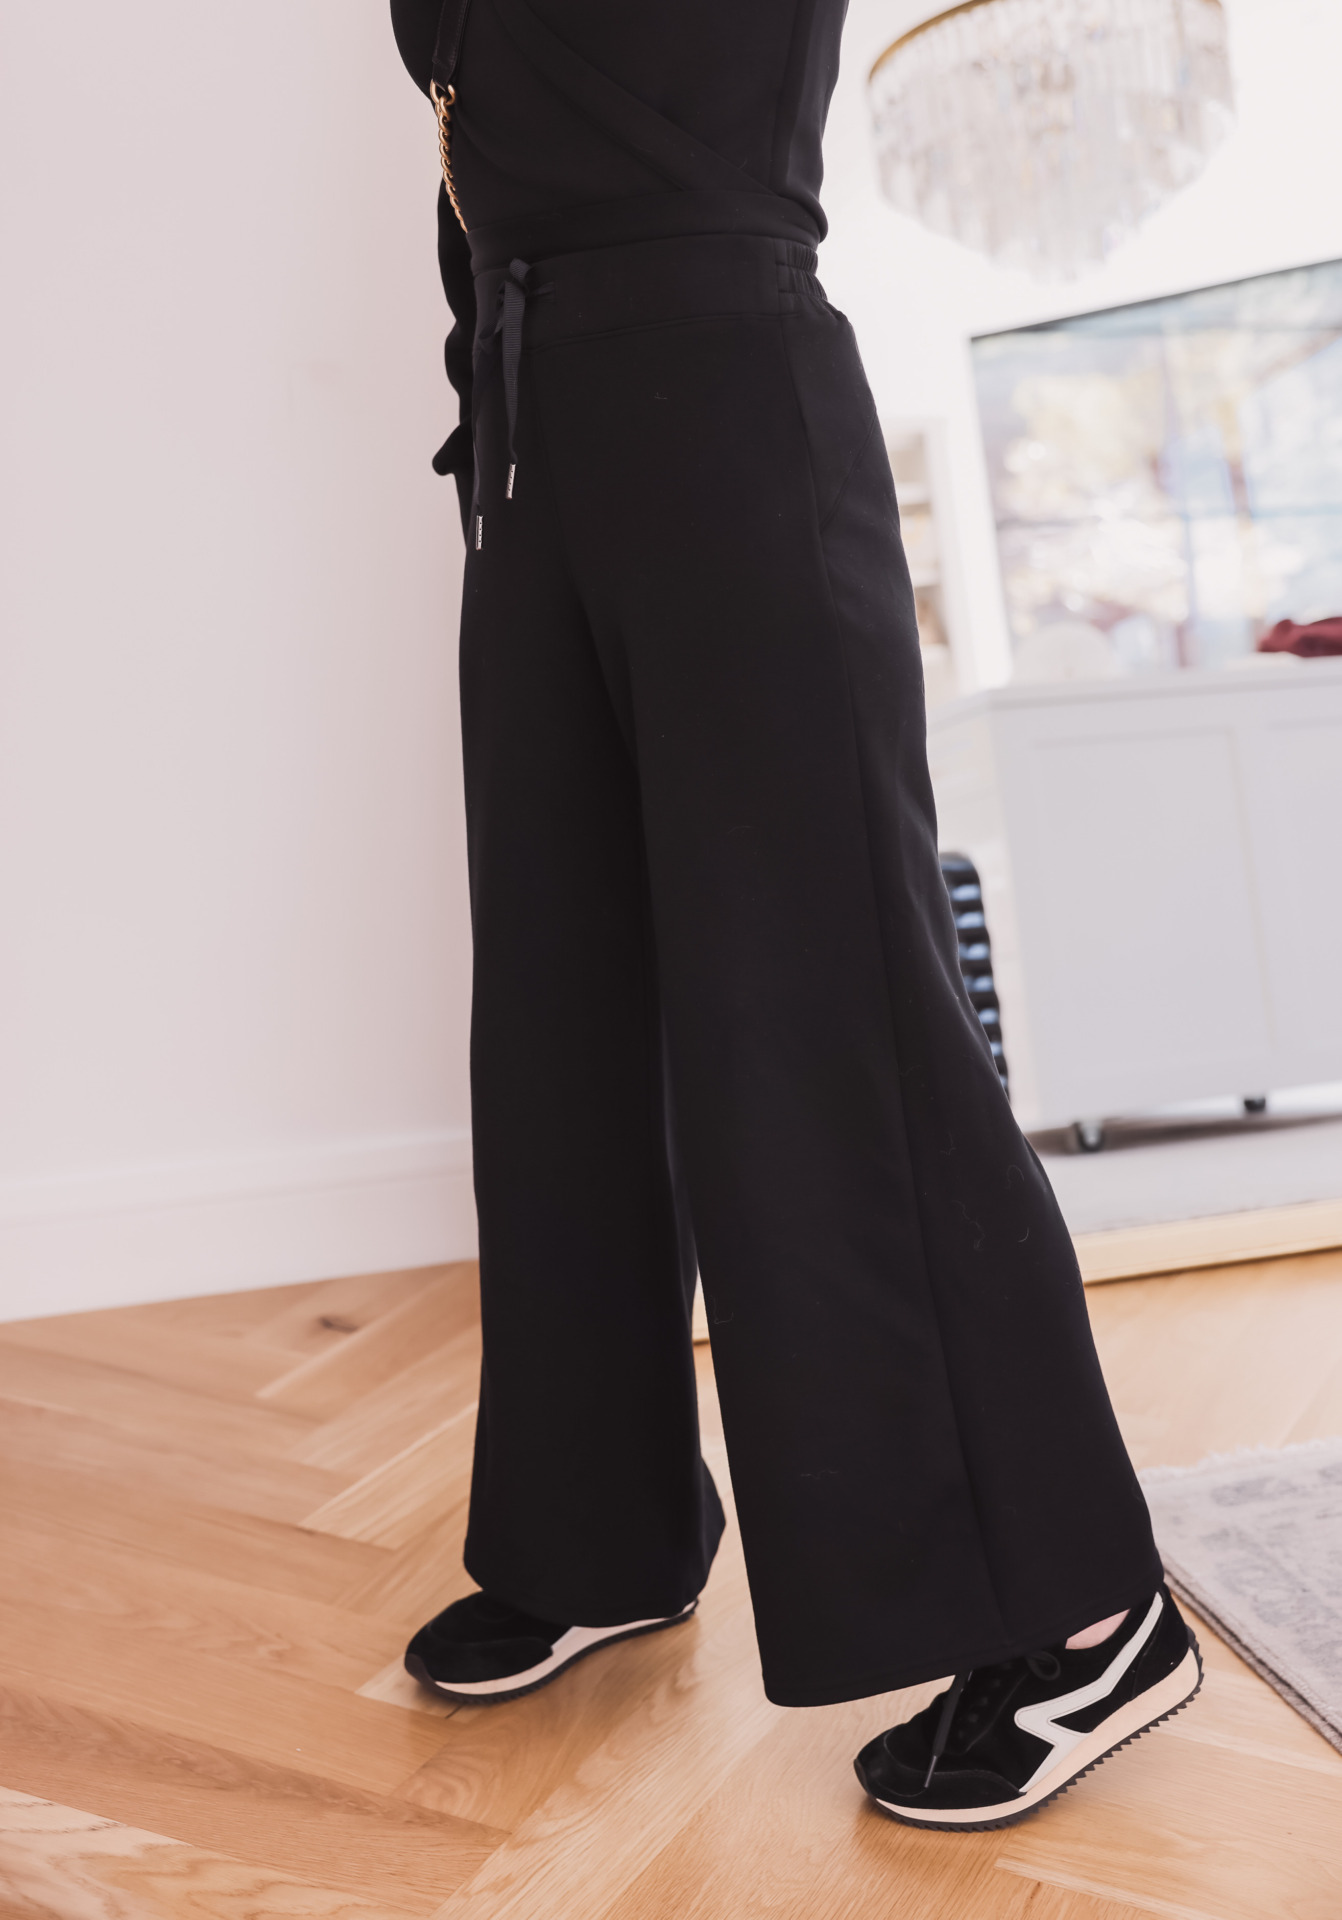 The perfect travel outfit for a long flight! ✈️ These Spanx Air Essentials  wide leg pants and half zip sweatshirt will keep me cozy